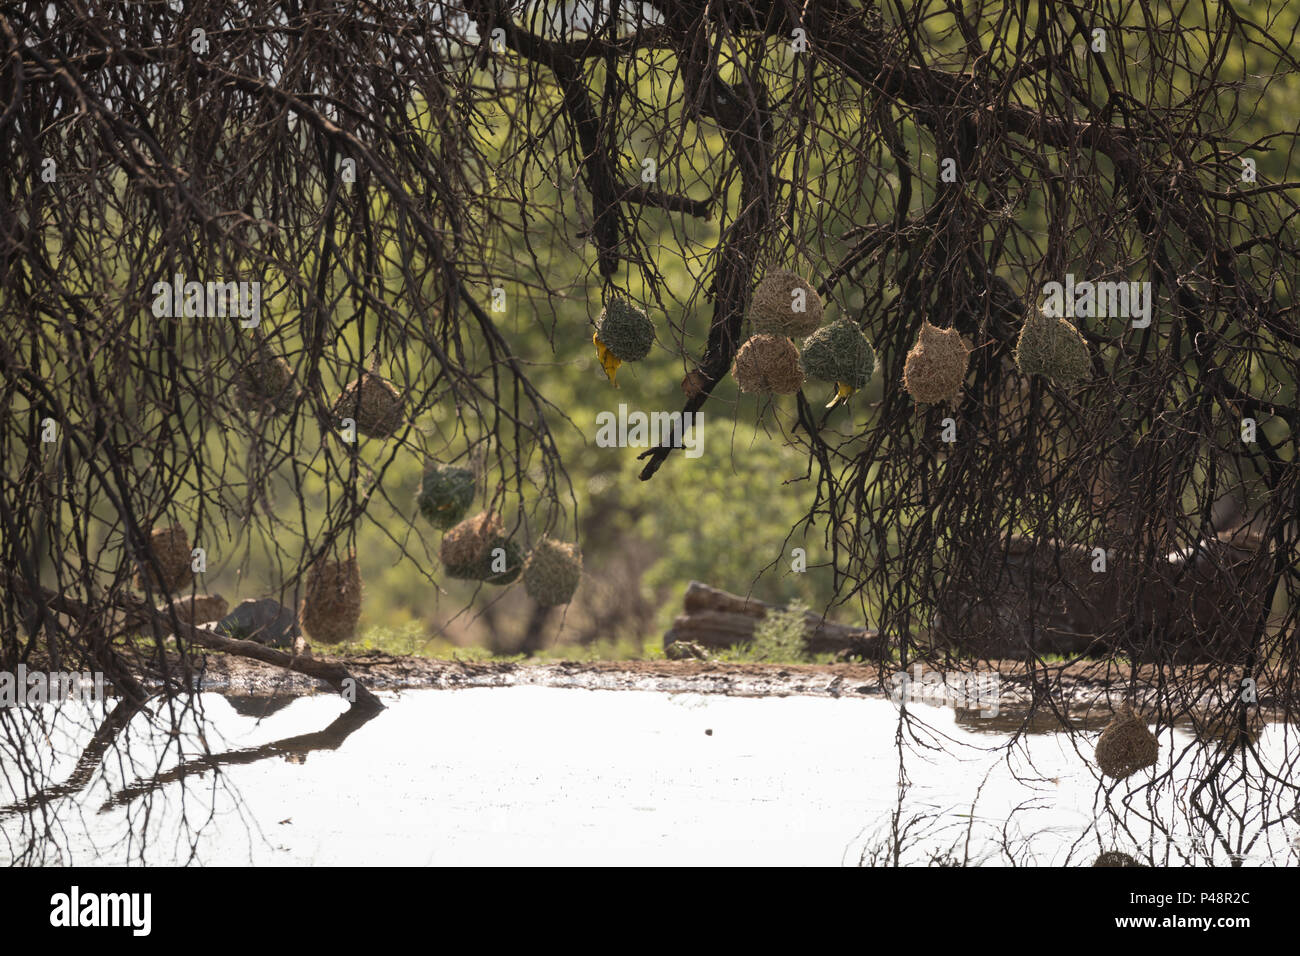 Weaver bird nests at a branch of the tree Stock Photo